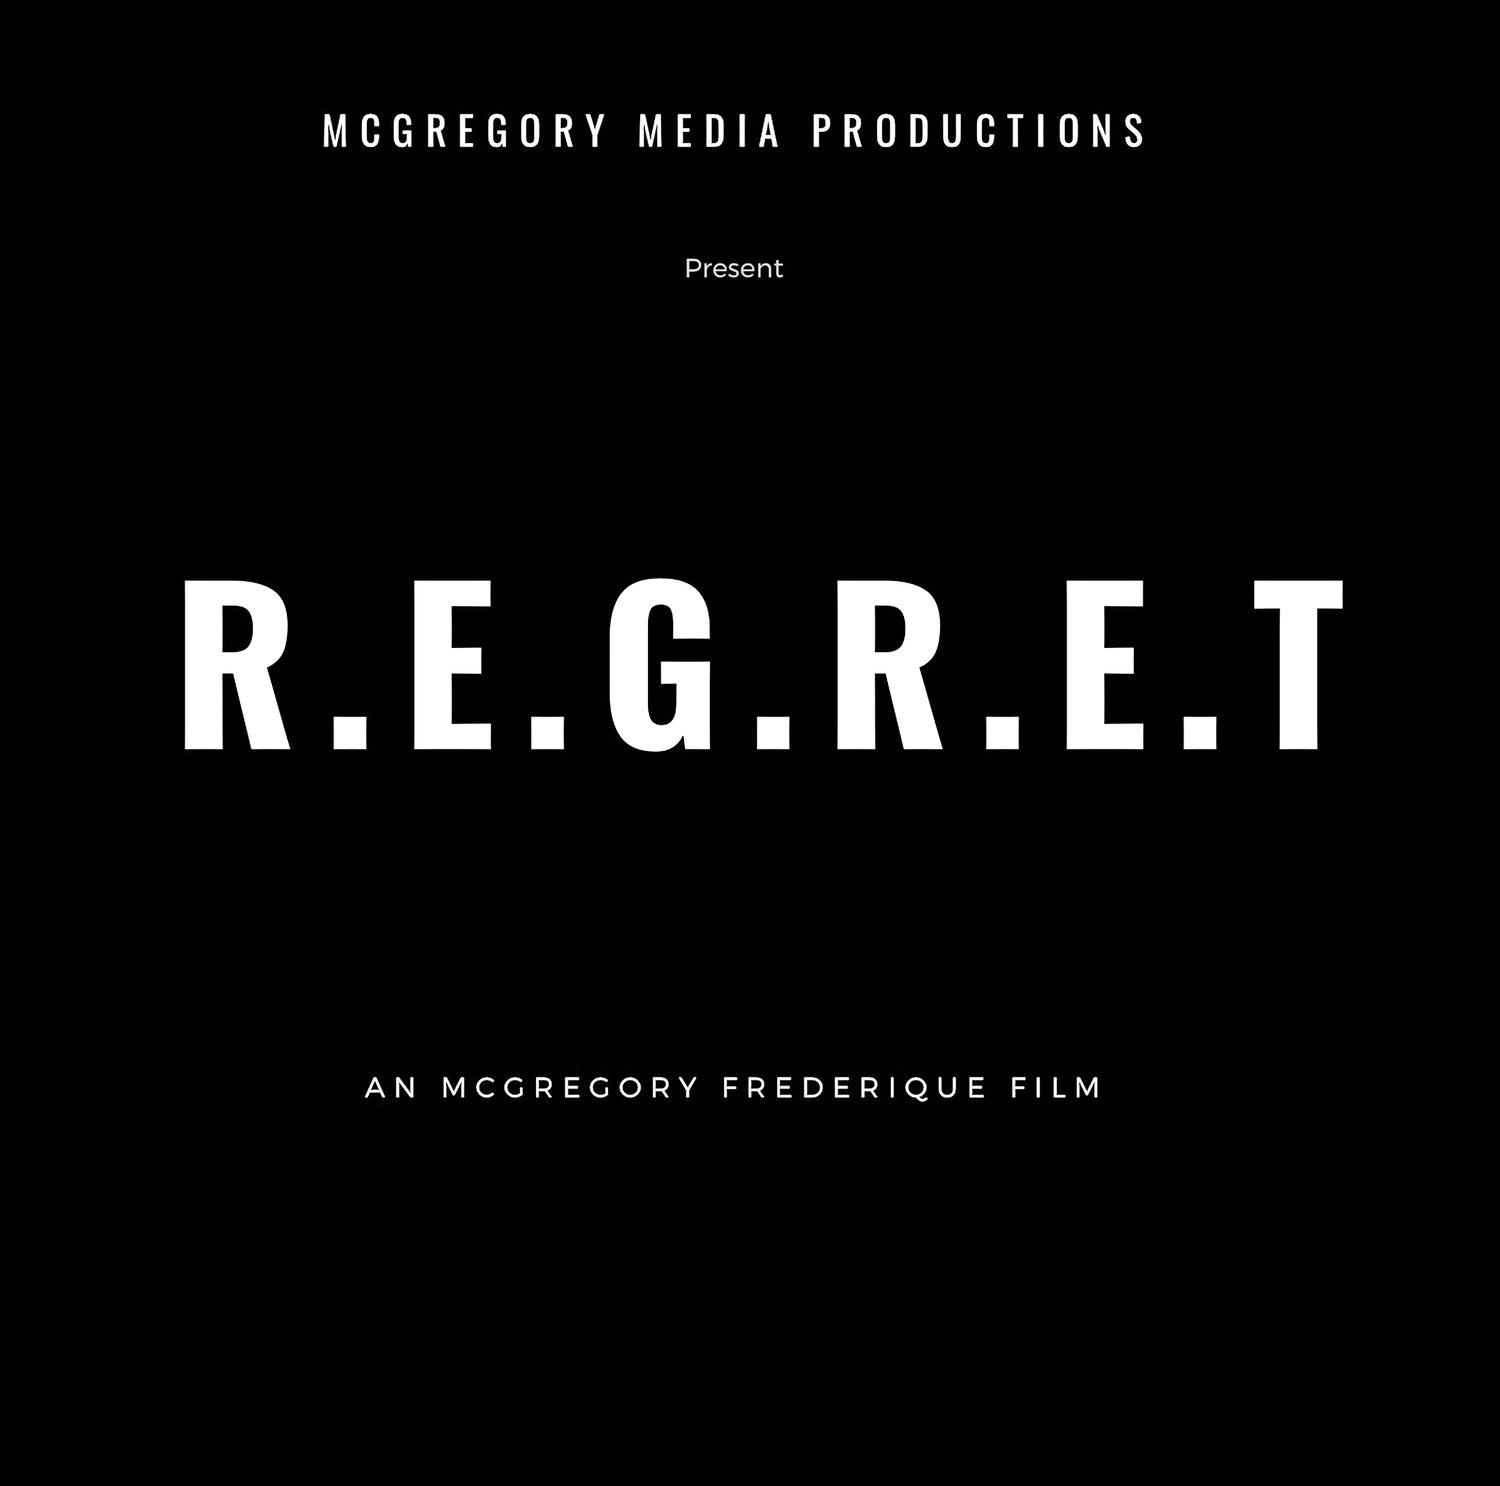 “R.E.G.R.E.T,” a new film by Elmont-native McGregory Frederique will be screened at film festivals throughout Long Island this summer.